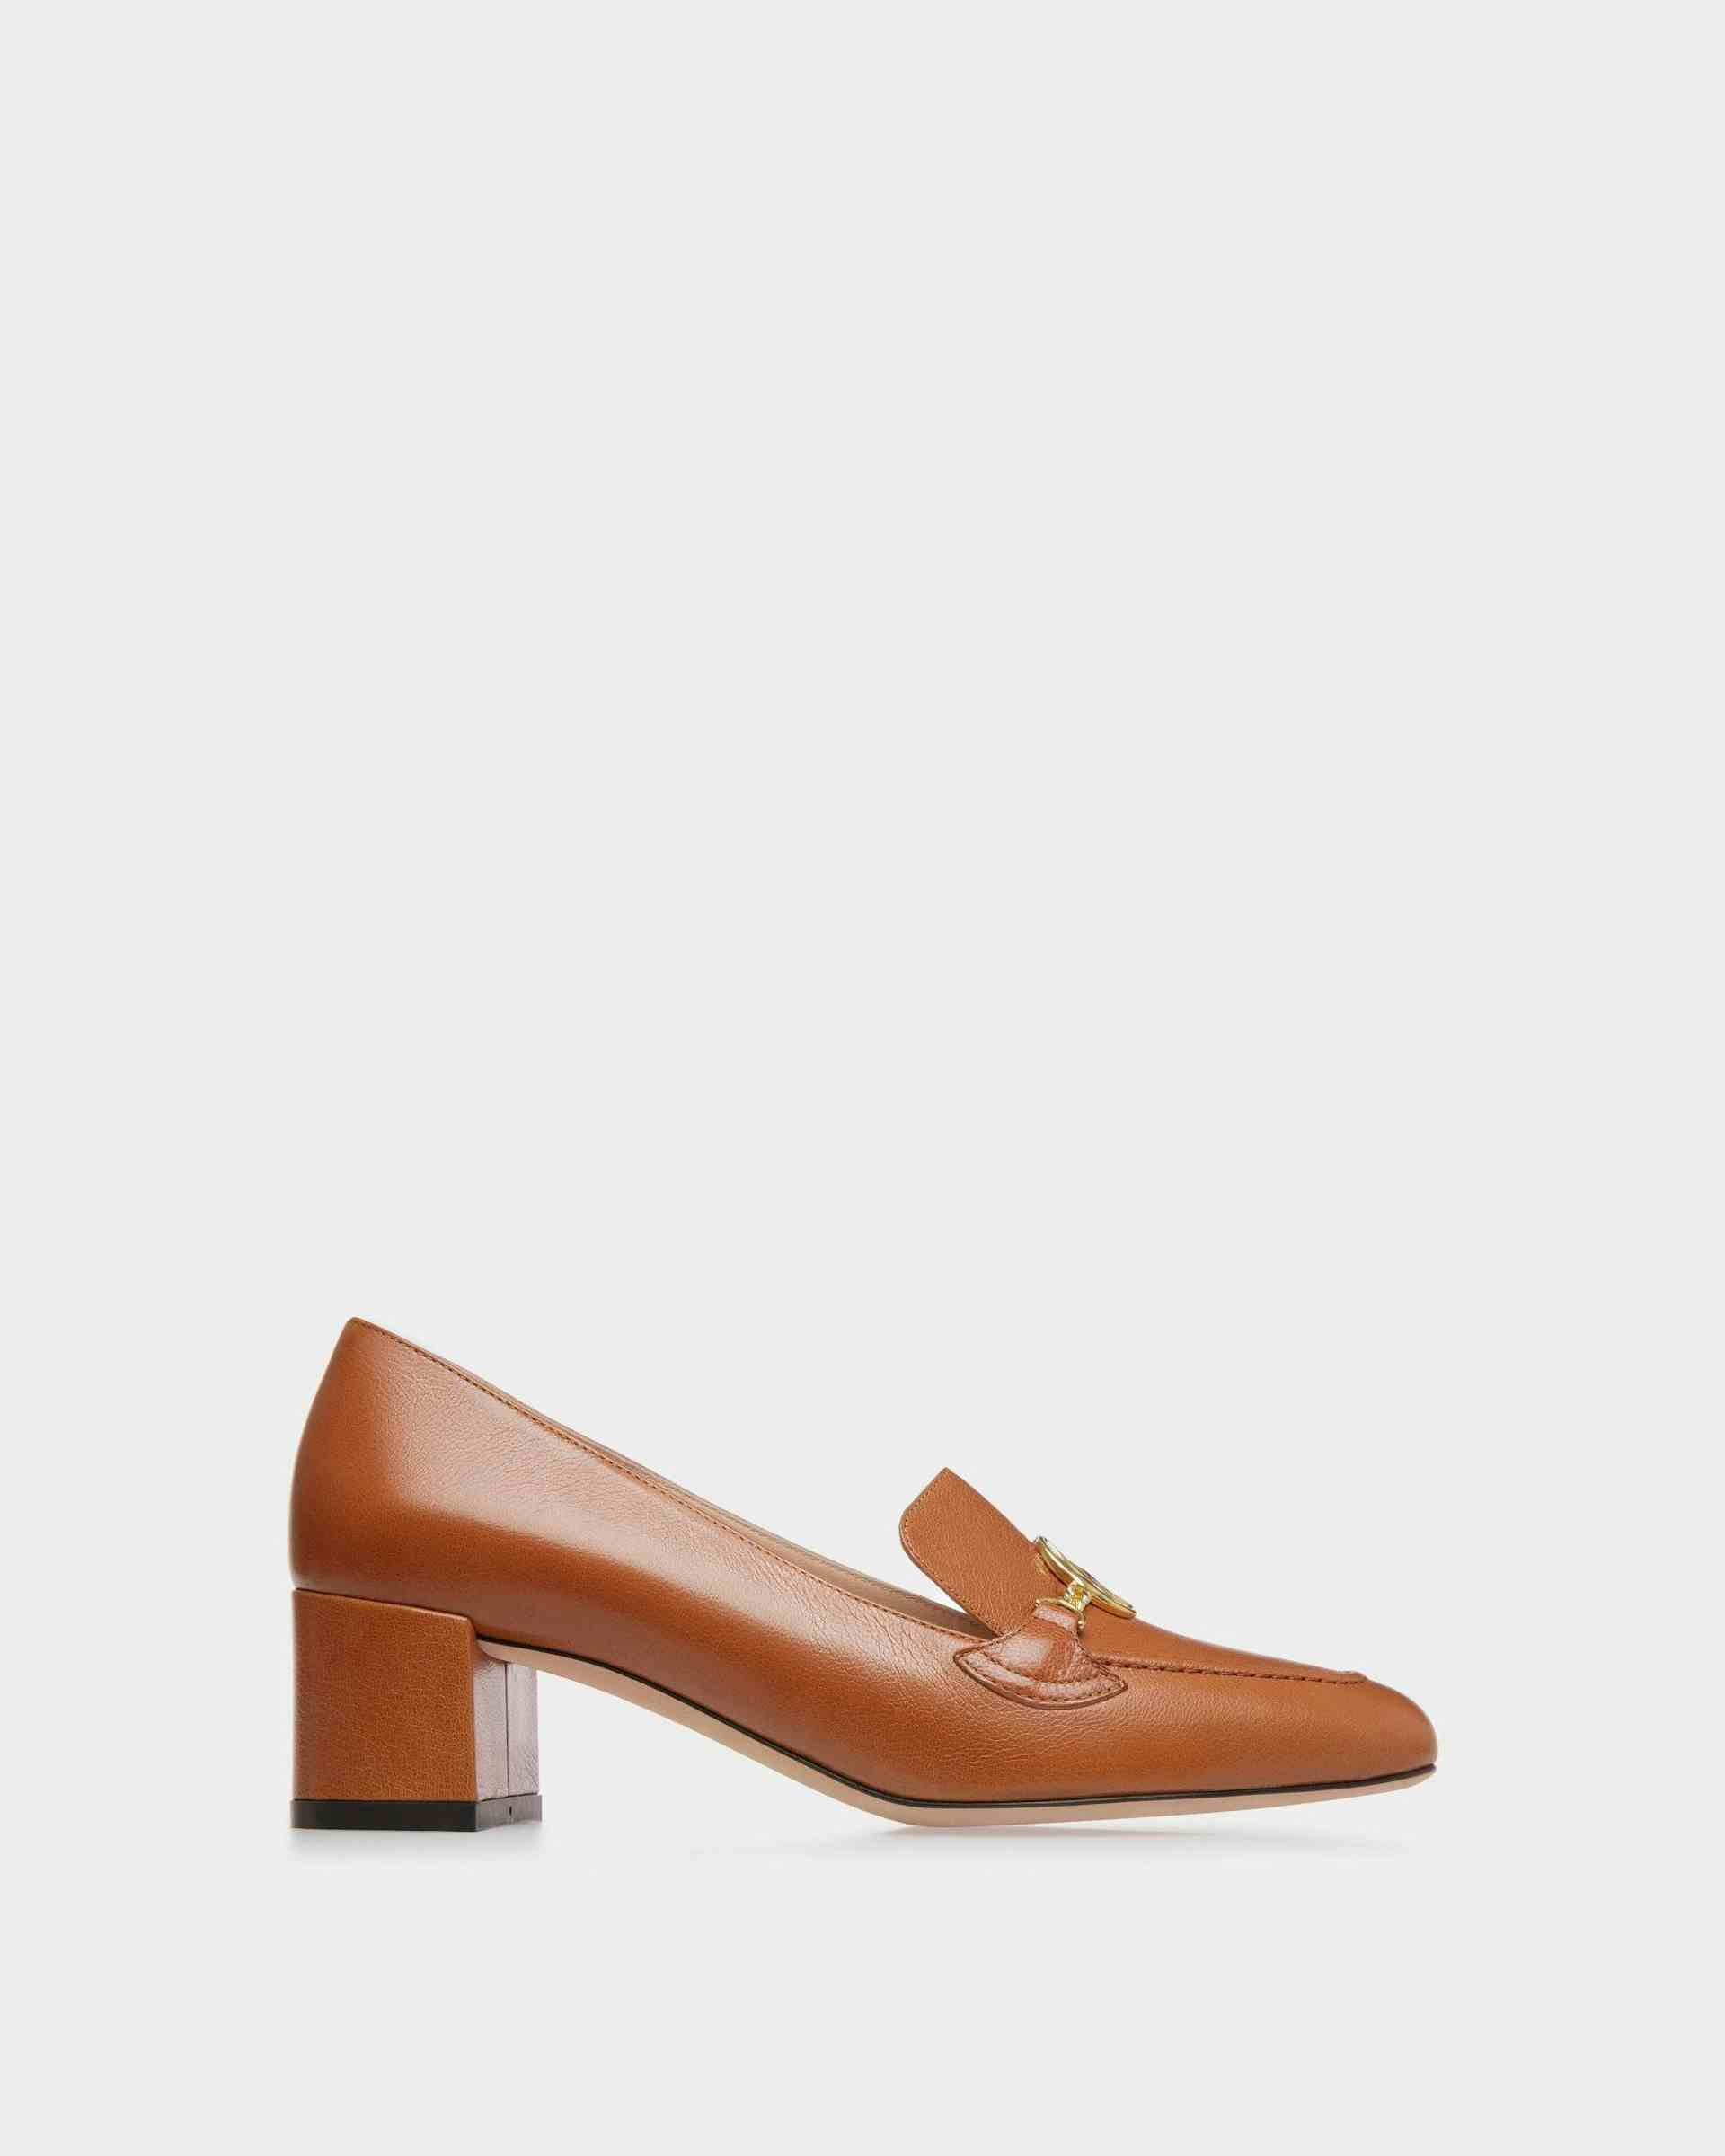 Emblem Pumps In Brown Leather - Women's - Bally